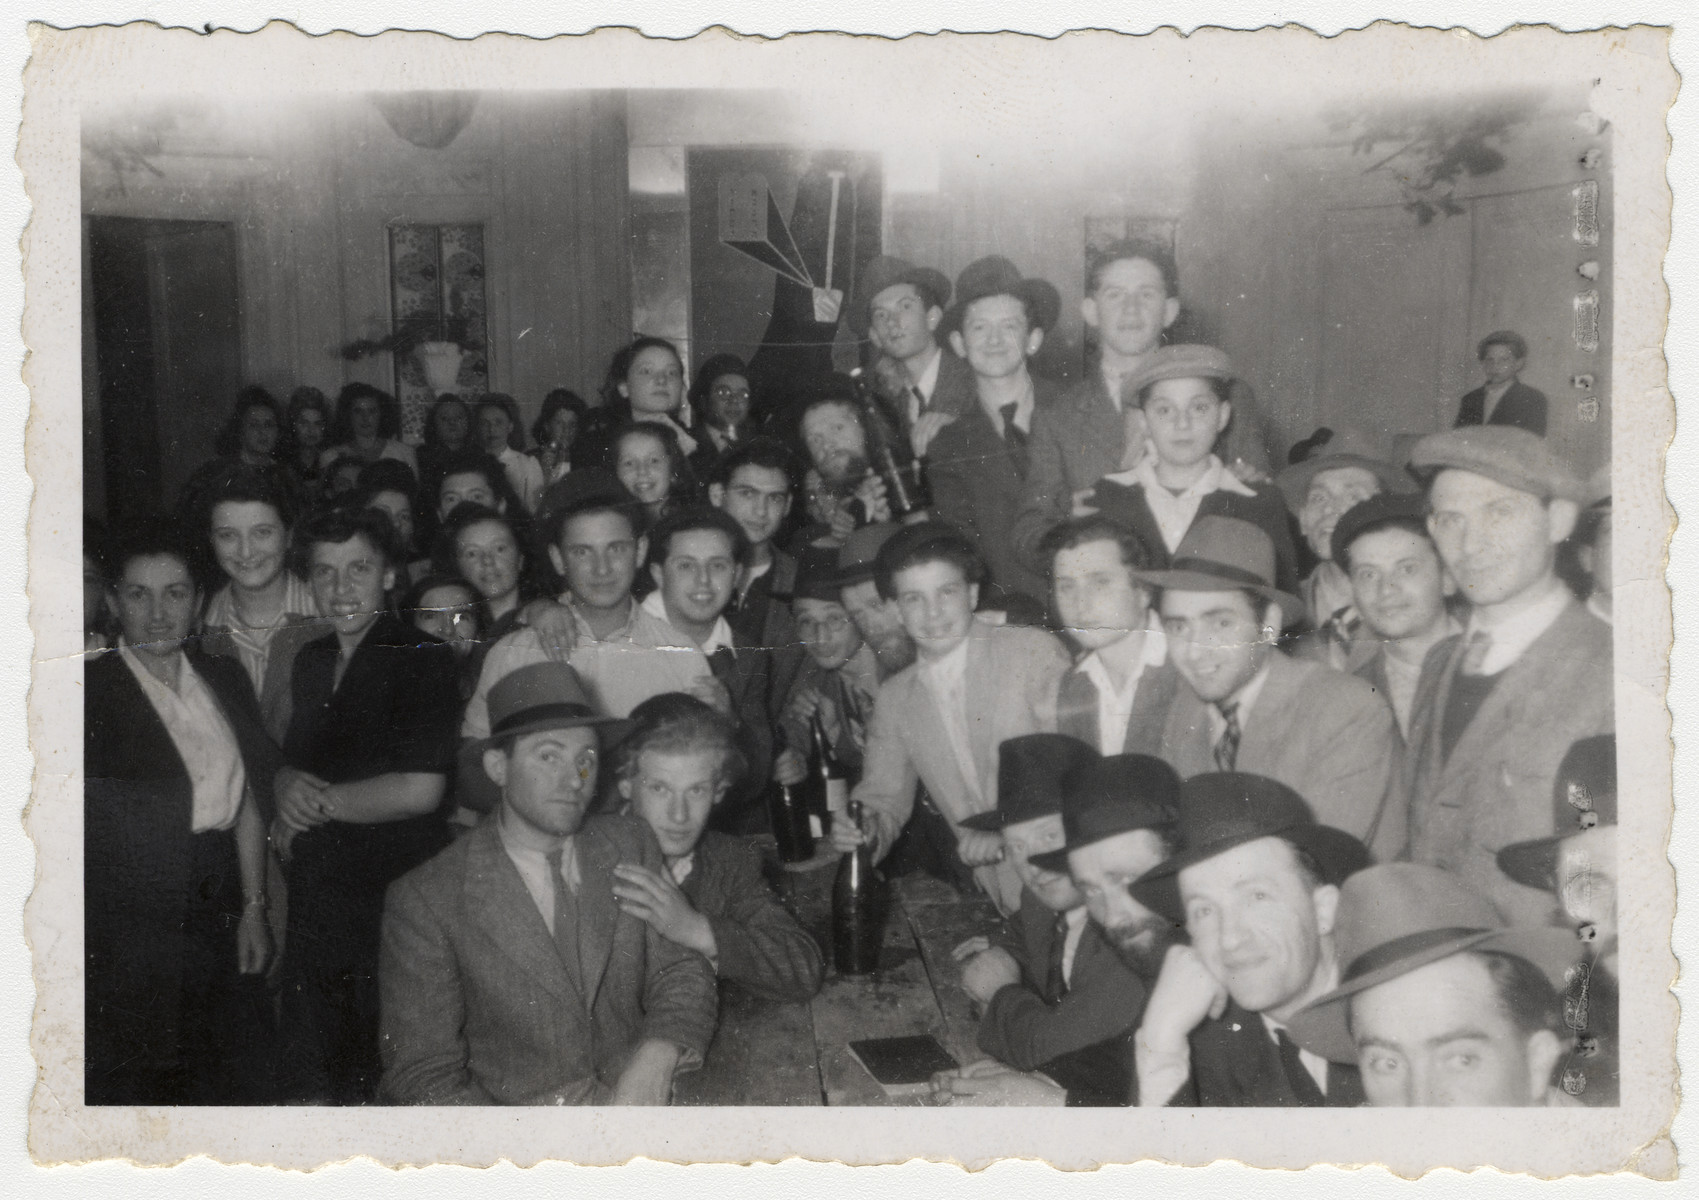 Orthodox displaced persons gather together for a celebration in Kibbutz Hafetz Hayyim in Nazzarno, Italy.

Kibbutz Hafetz Hayyim, named after the great rabbi, Rabbi Israel Meir Kagan, is the name given to a series of some fifteen religious kibbutzim founded by the Poalei Agudat Yisrael movement.